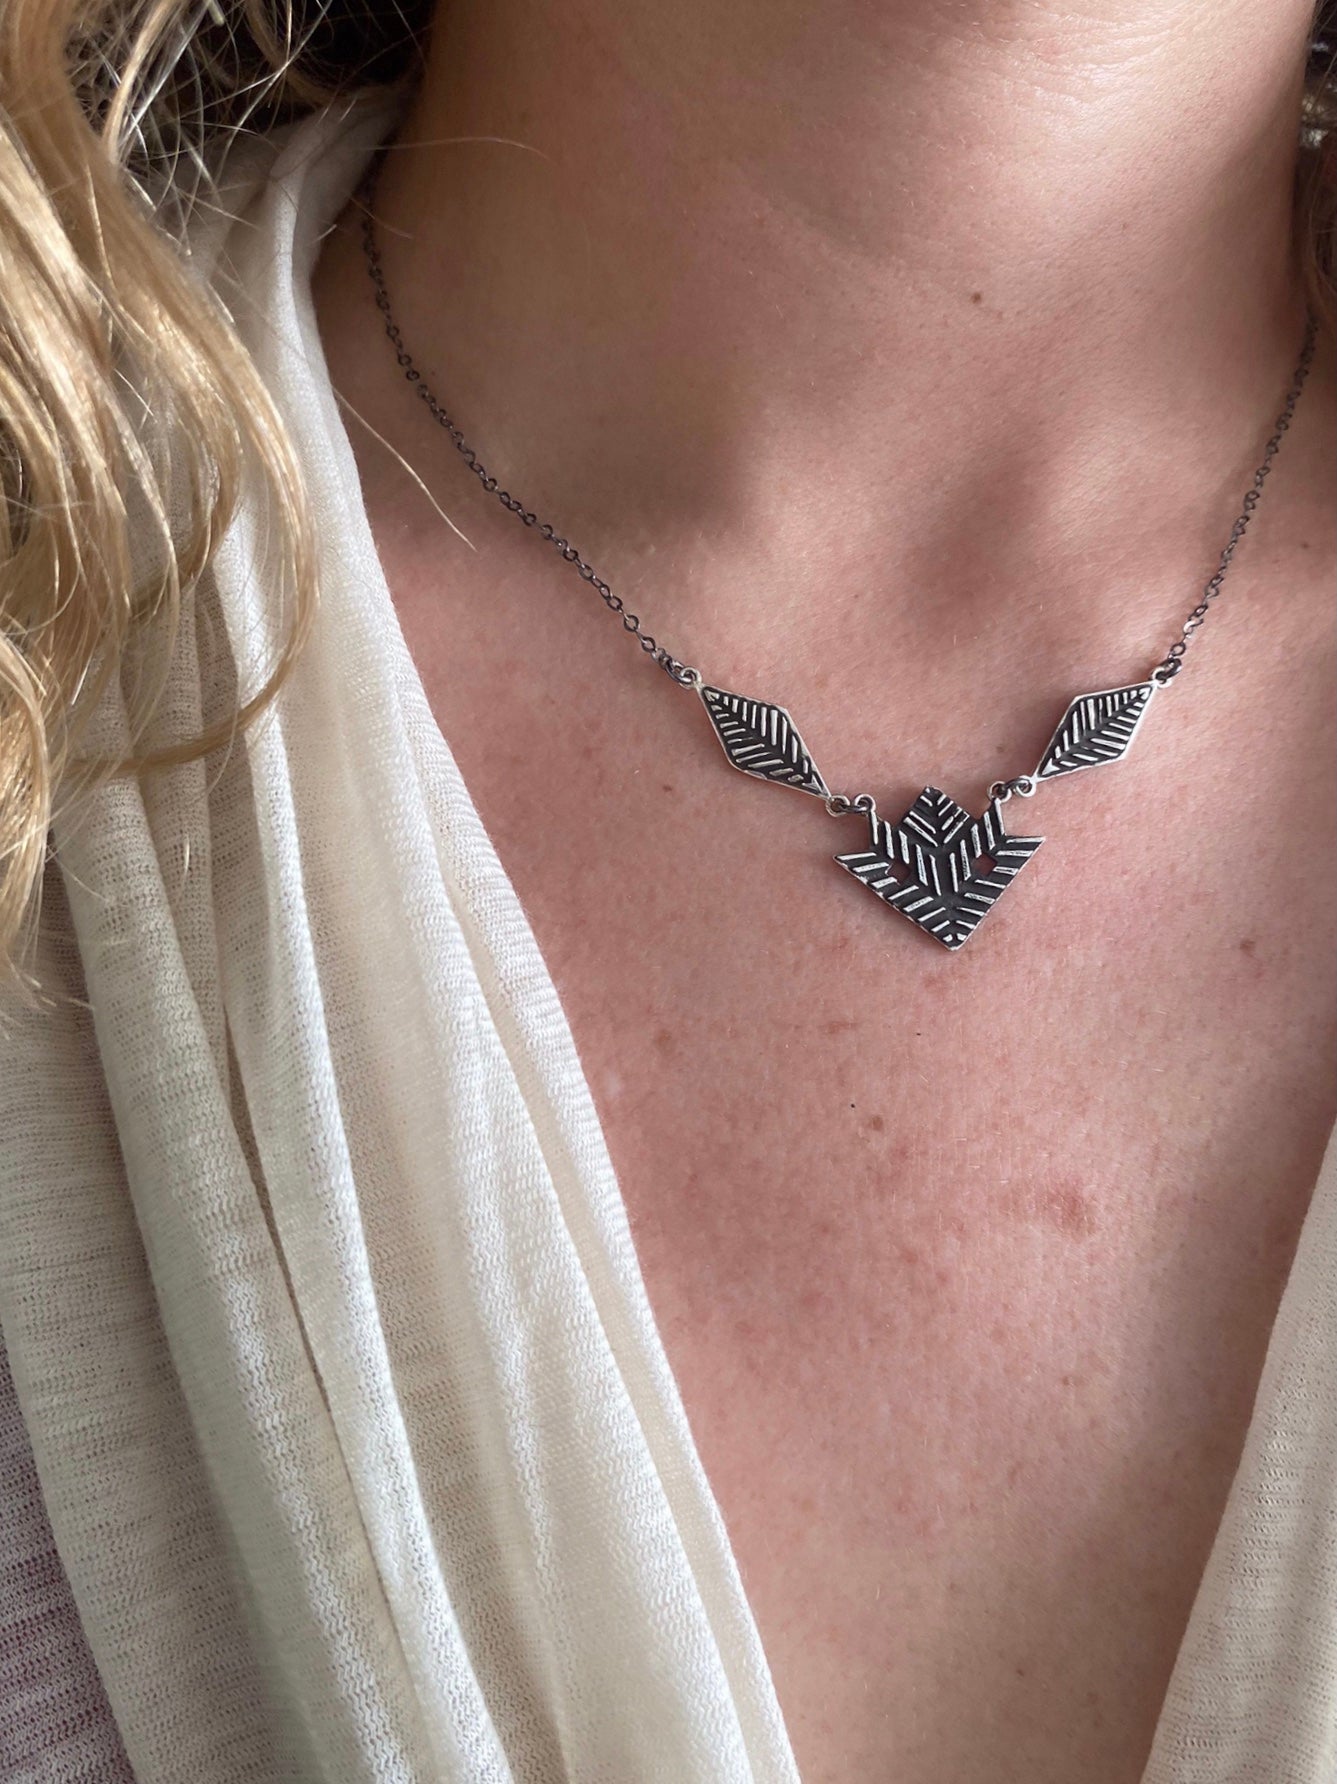 Collarbone romvos | velonies/stitches silver necklace